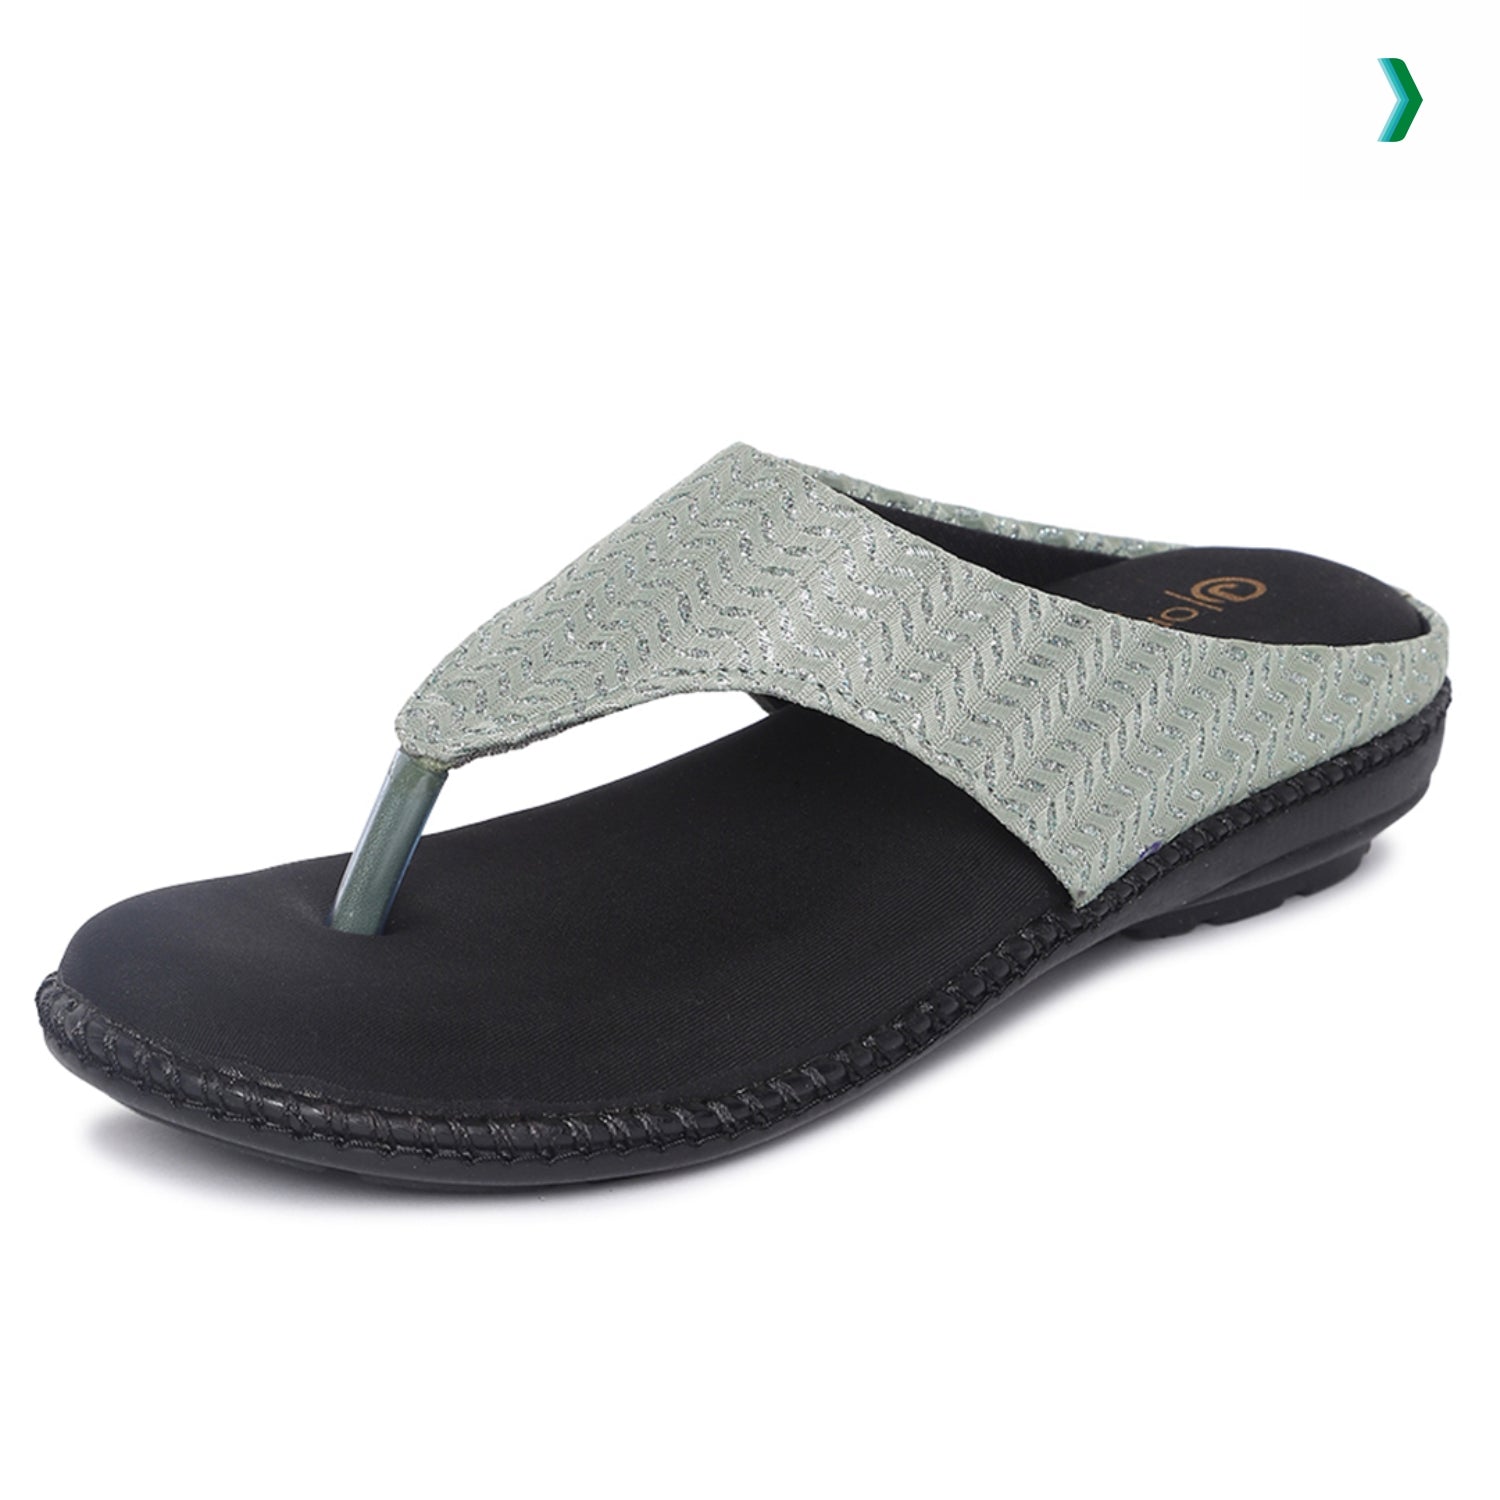 extra soft chappals for ladies, extra soft slippers for ladies